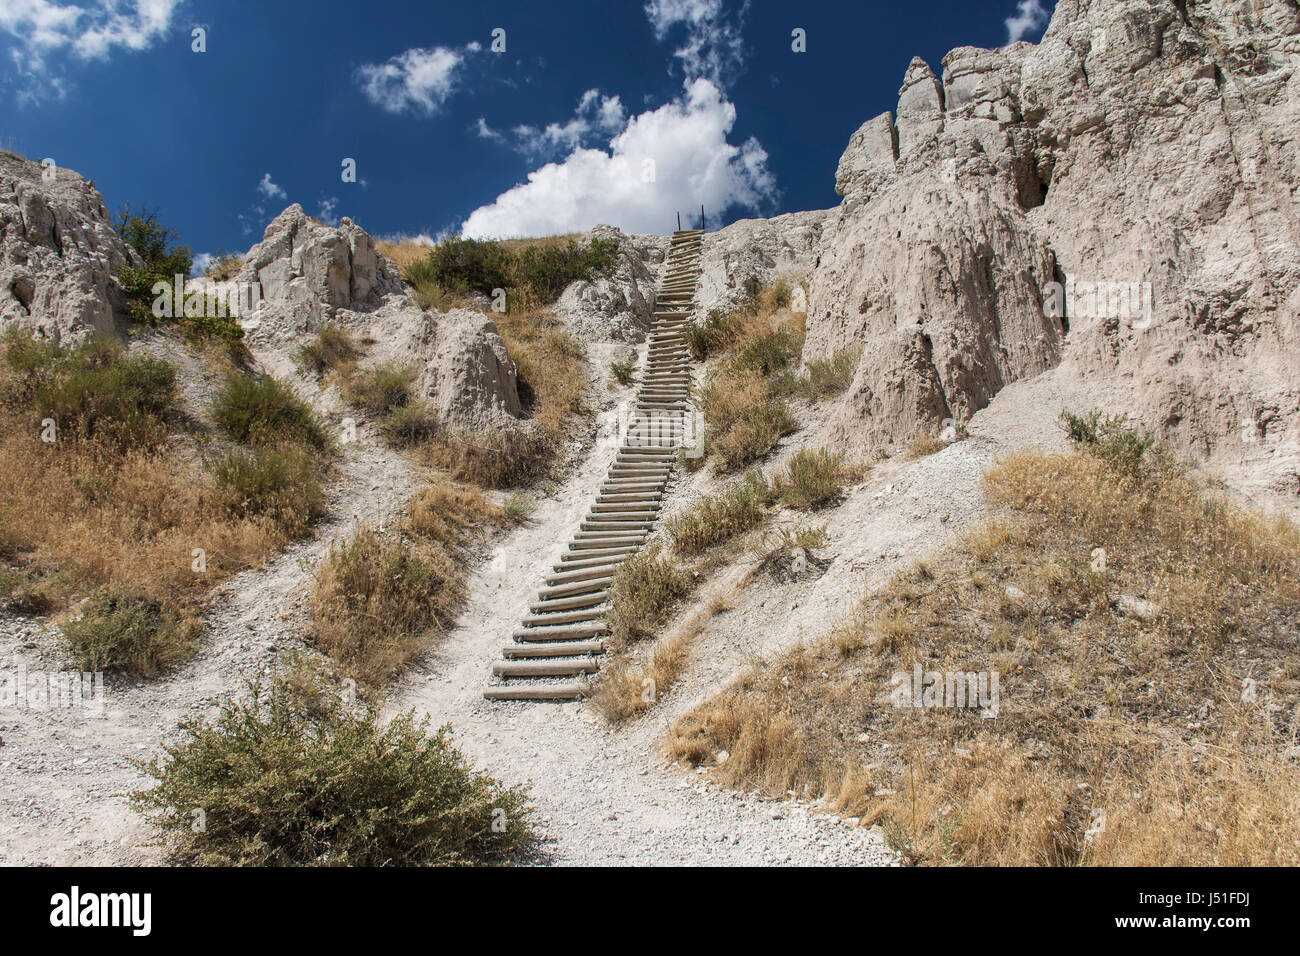 The Notch Trail showing a ladder in Badlands National Park, South Dakota, USA. Stock Photo